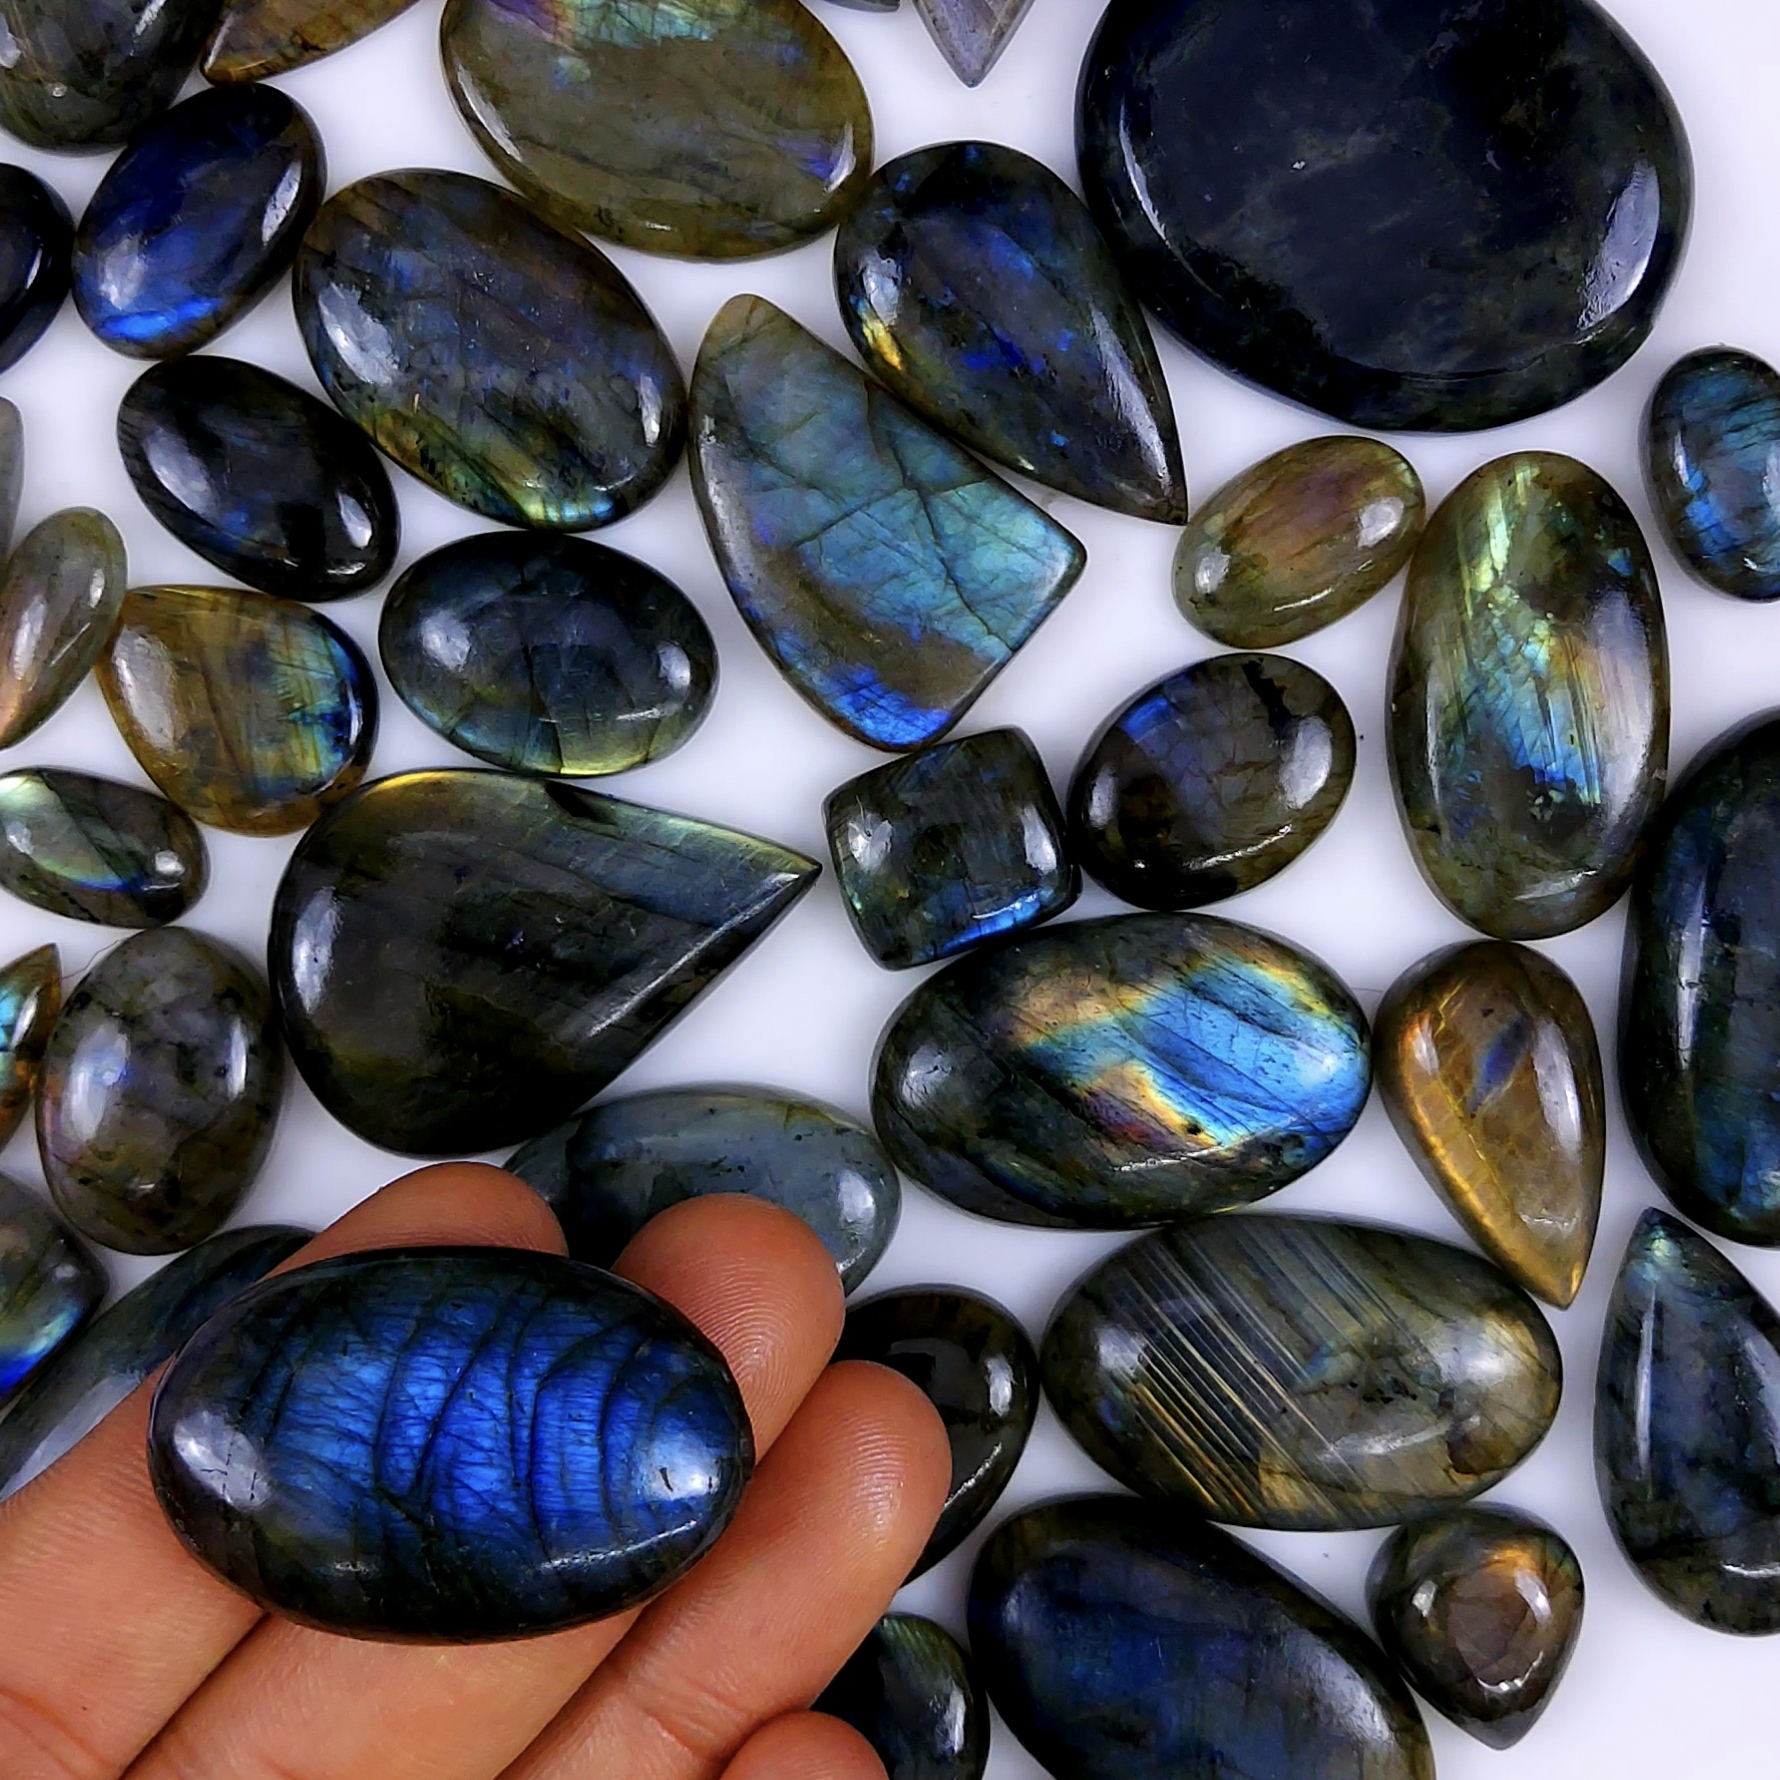 43pc 1516Cts Labradorite Cabochon Multifire Healing Crystal For Jewelry Supplies, Labradorite Necklace Handmade Wire Wrapped Gemstone Pendant 47x26 12x9mm#6314